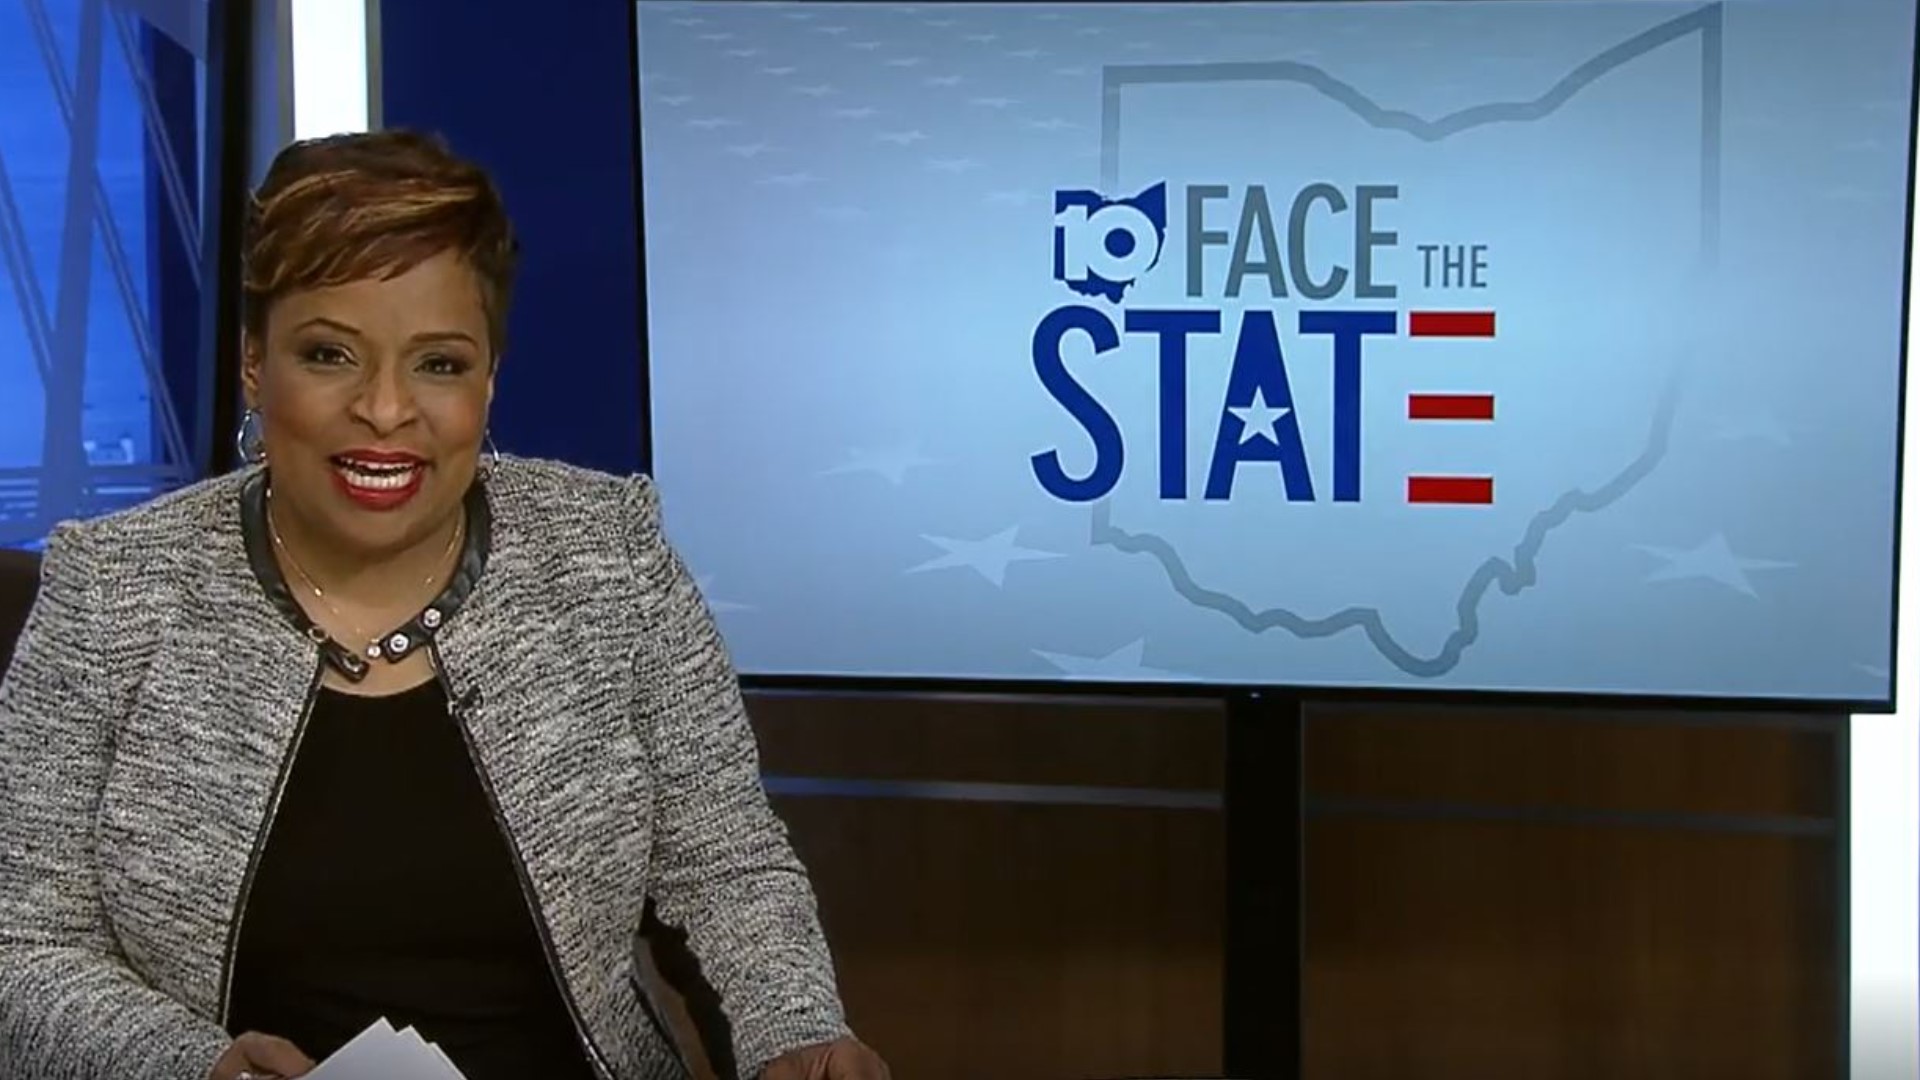 On this week's Face the State: An update on COVID-19 vaccination distribution in Ohio, drug overdoses soaring during pandemic and getting children back into school.